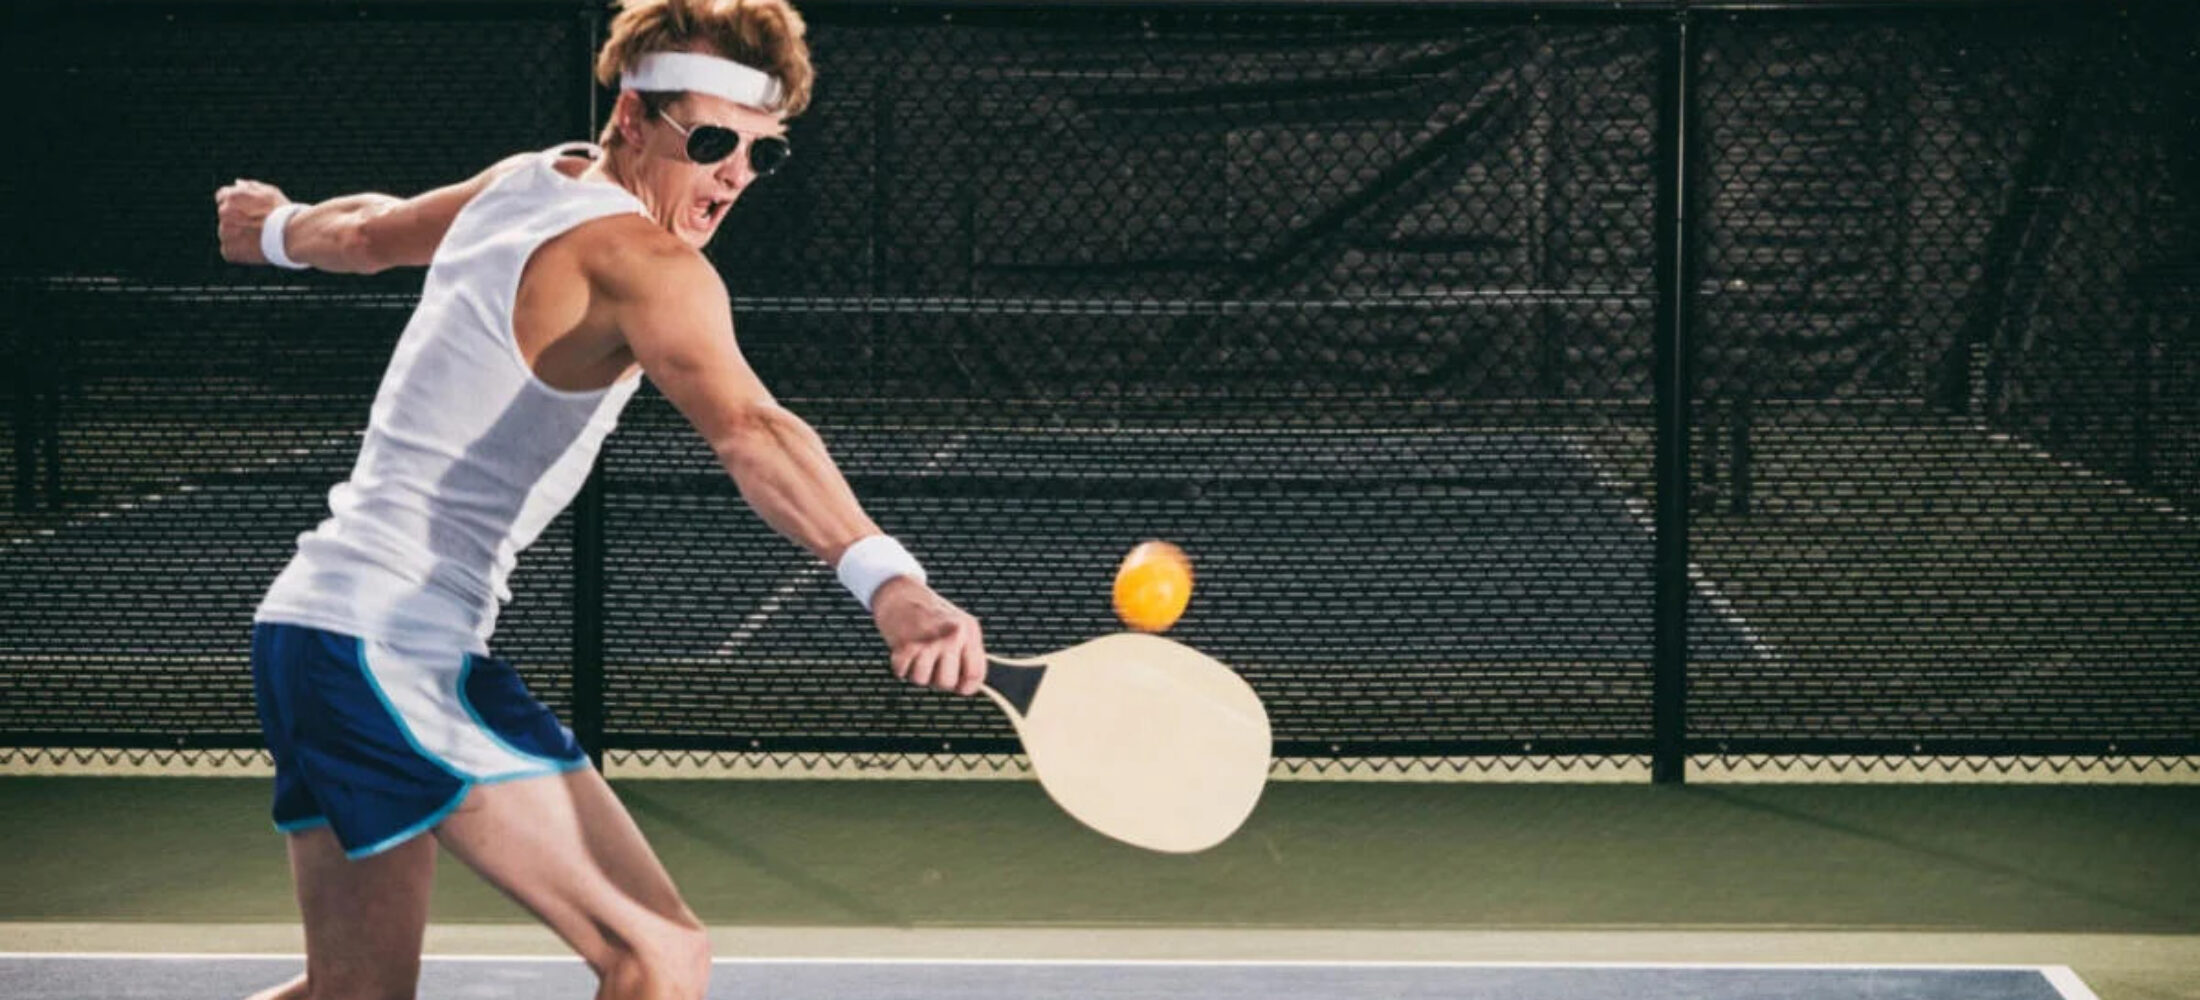 Pickleball Drills To Increase Hand Speed